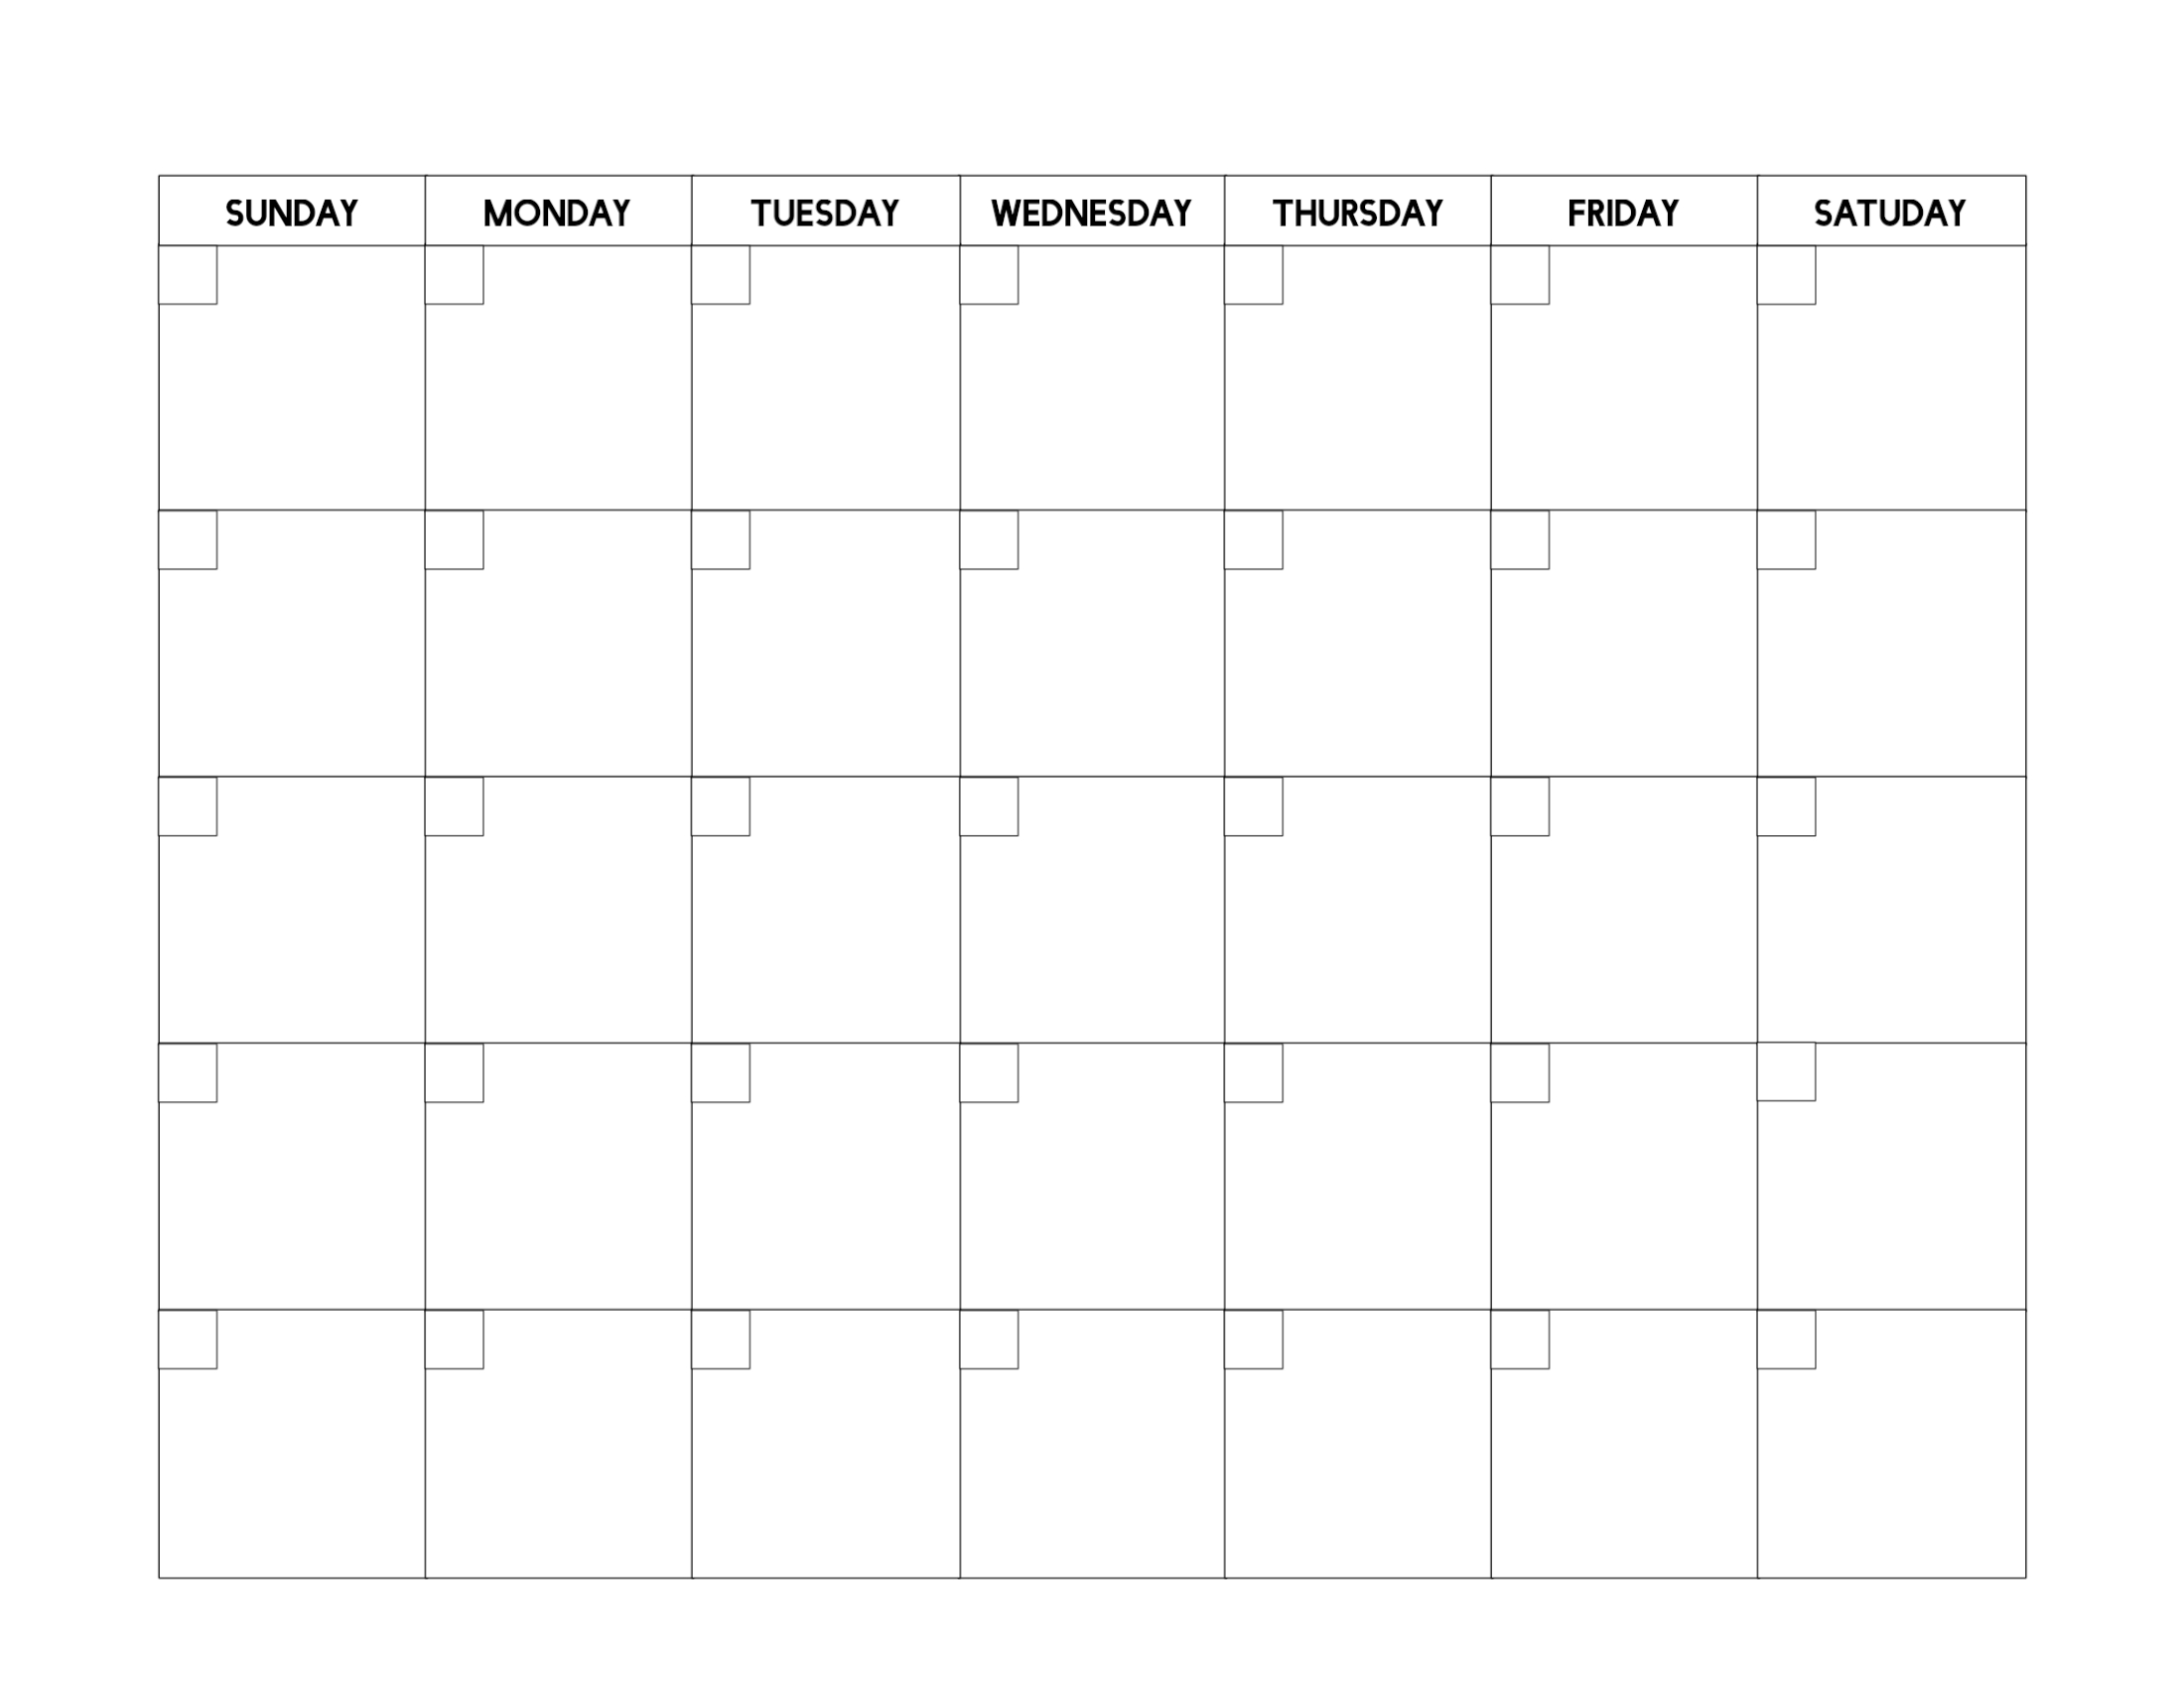 Free Printable Blank Calendar Template - Paper Trail Design Remarkable Printable Calendar With No Dates